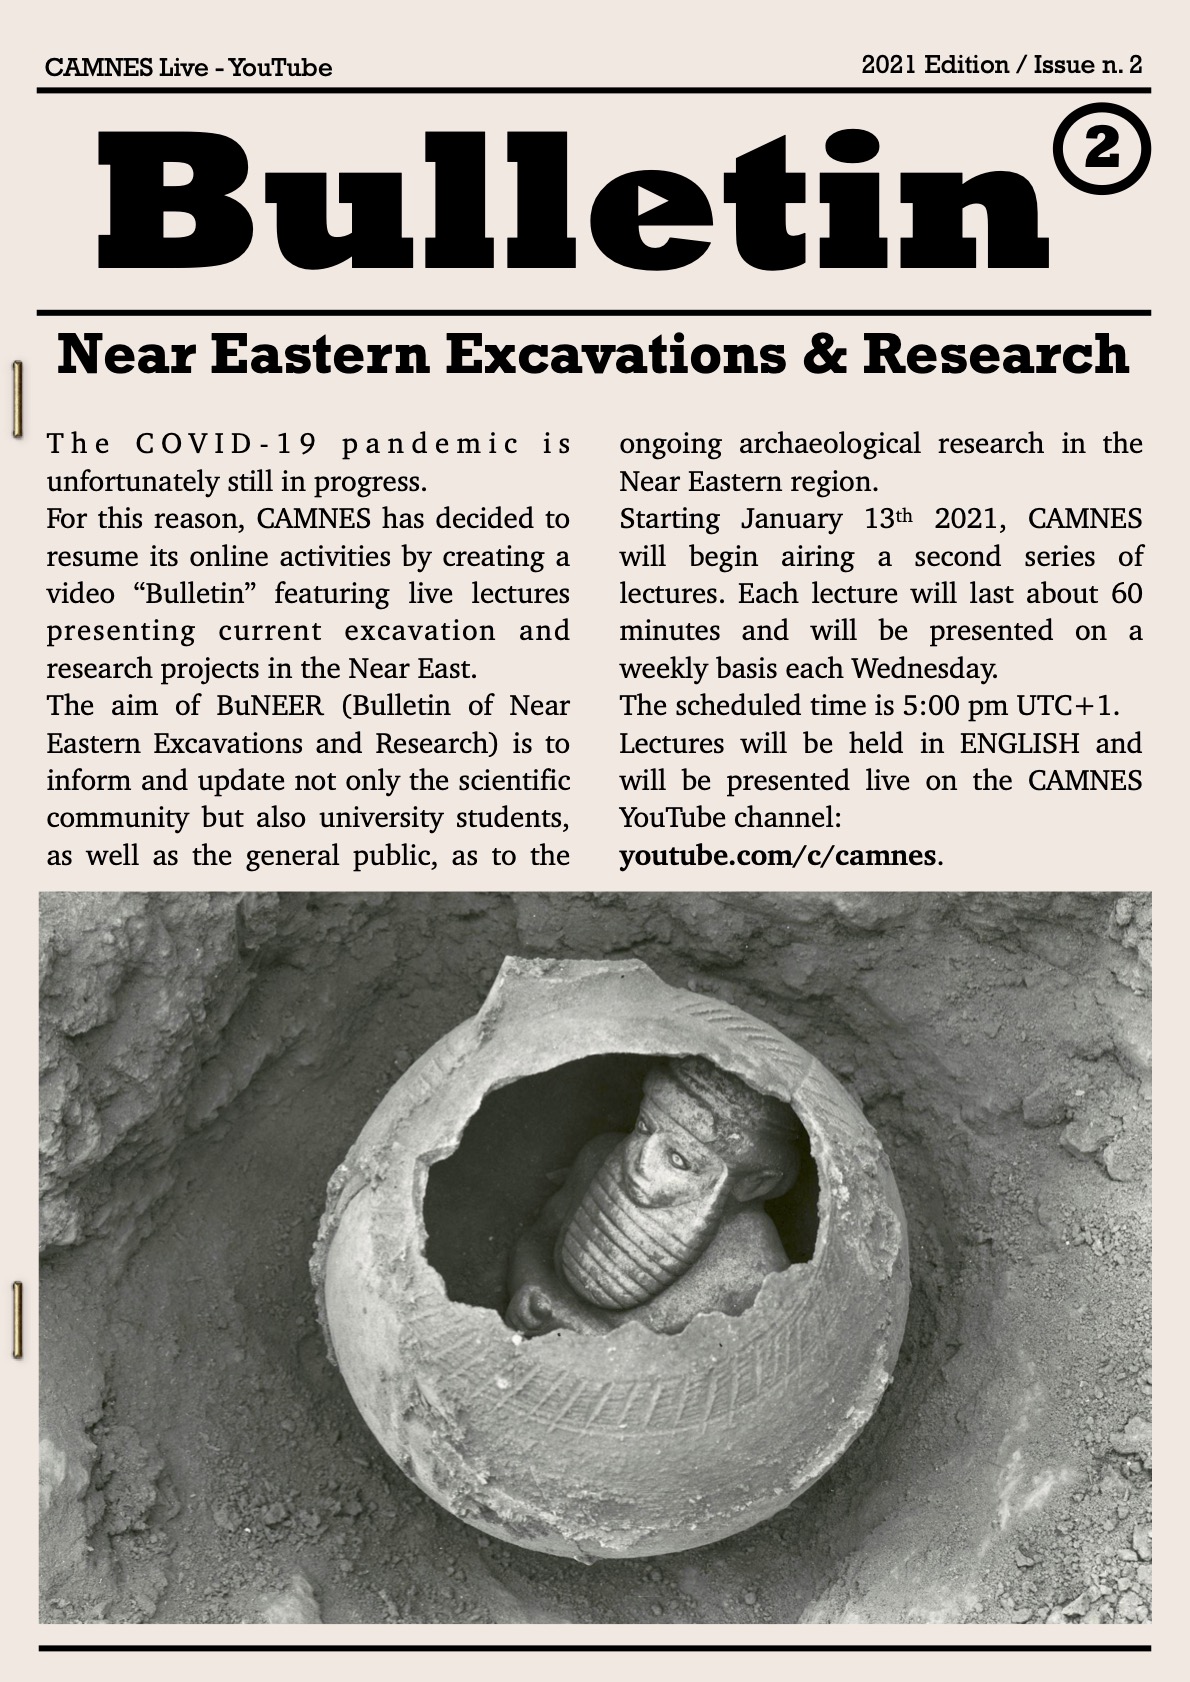 BuNEER 2: Bulletin of Near Eastern Excavations and Research